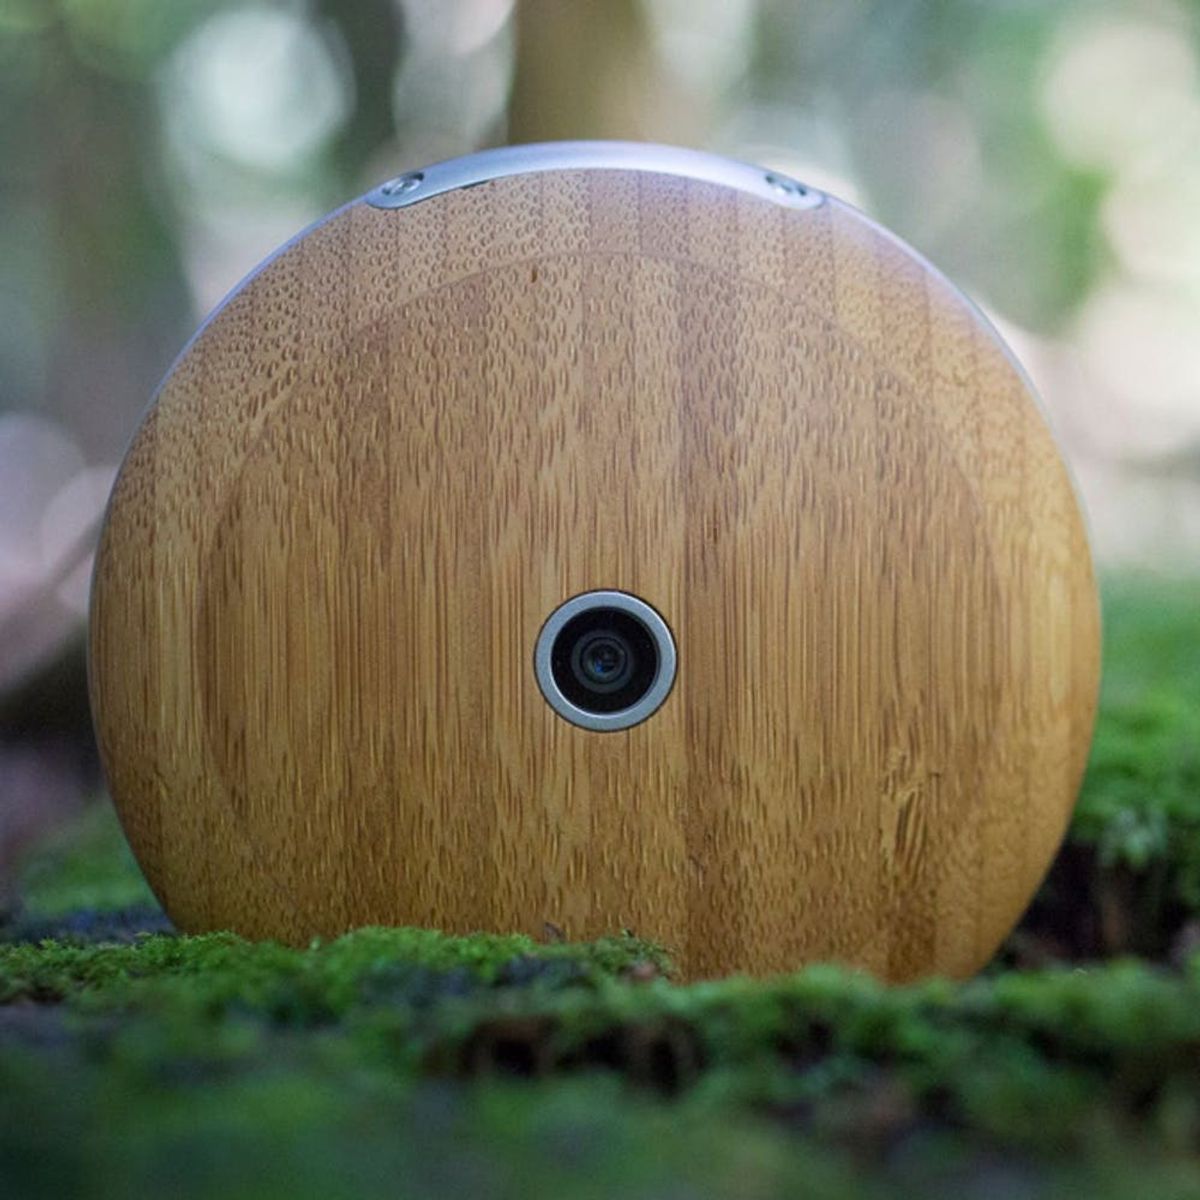 This Wooden Gadget Is the Anti-Smartphone